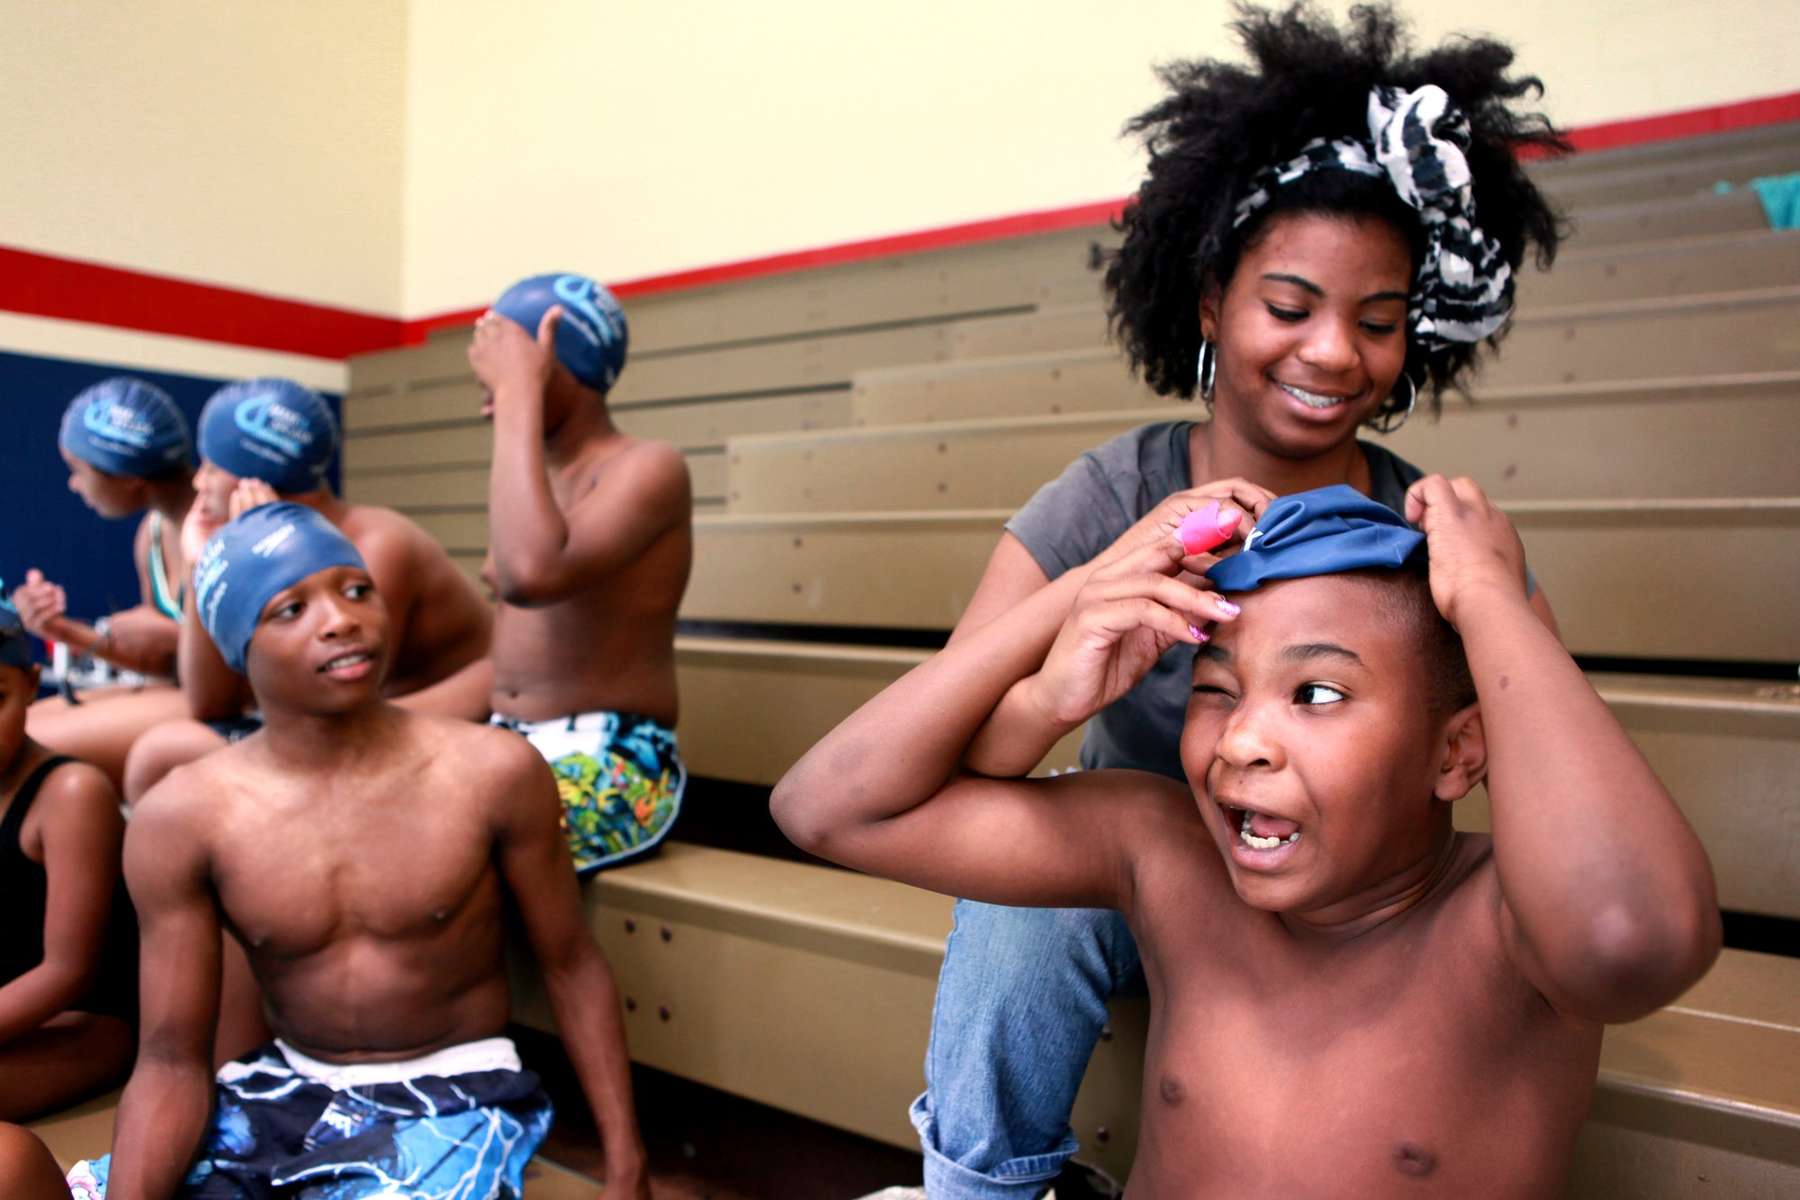 Mekkah Richards, 15, helps her brother Abel Richards, 9, put on his swim cap before the start of event featuring Olympic gold medalist swimmer Cullen Jones at the Mathews Dickey Boys and Girls Club in St. Louis. The event, Make A Splash, put on by the USA Swimming Foundation, is designed to raise awareness about the importance of learning to swim.  The program has helped provide more than 845,000 kids with swimming lessons.